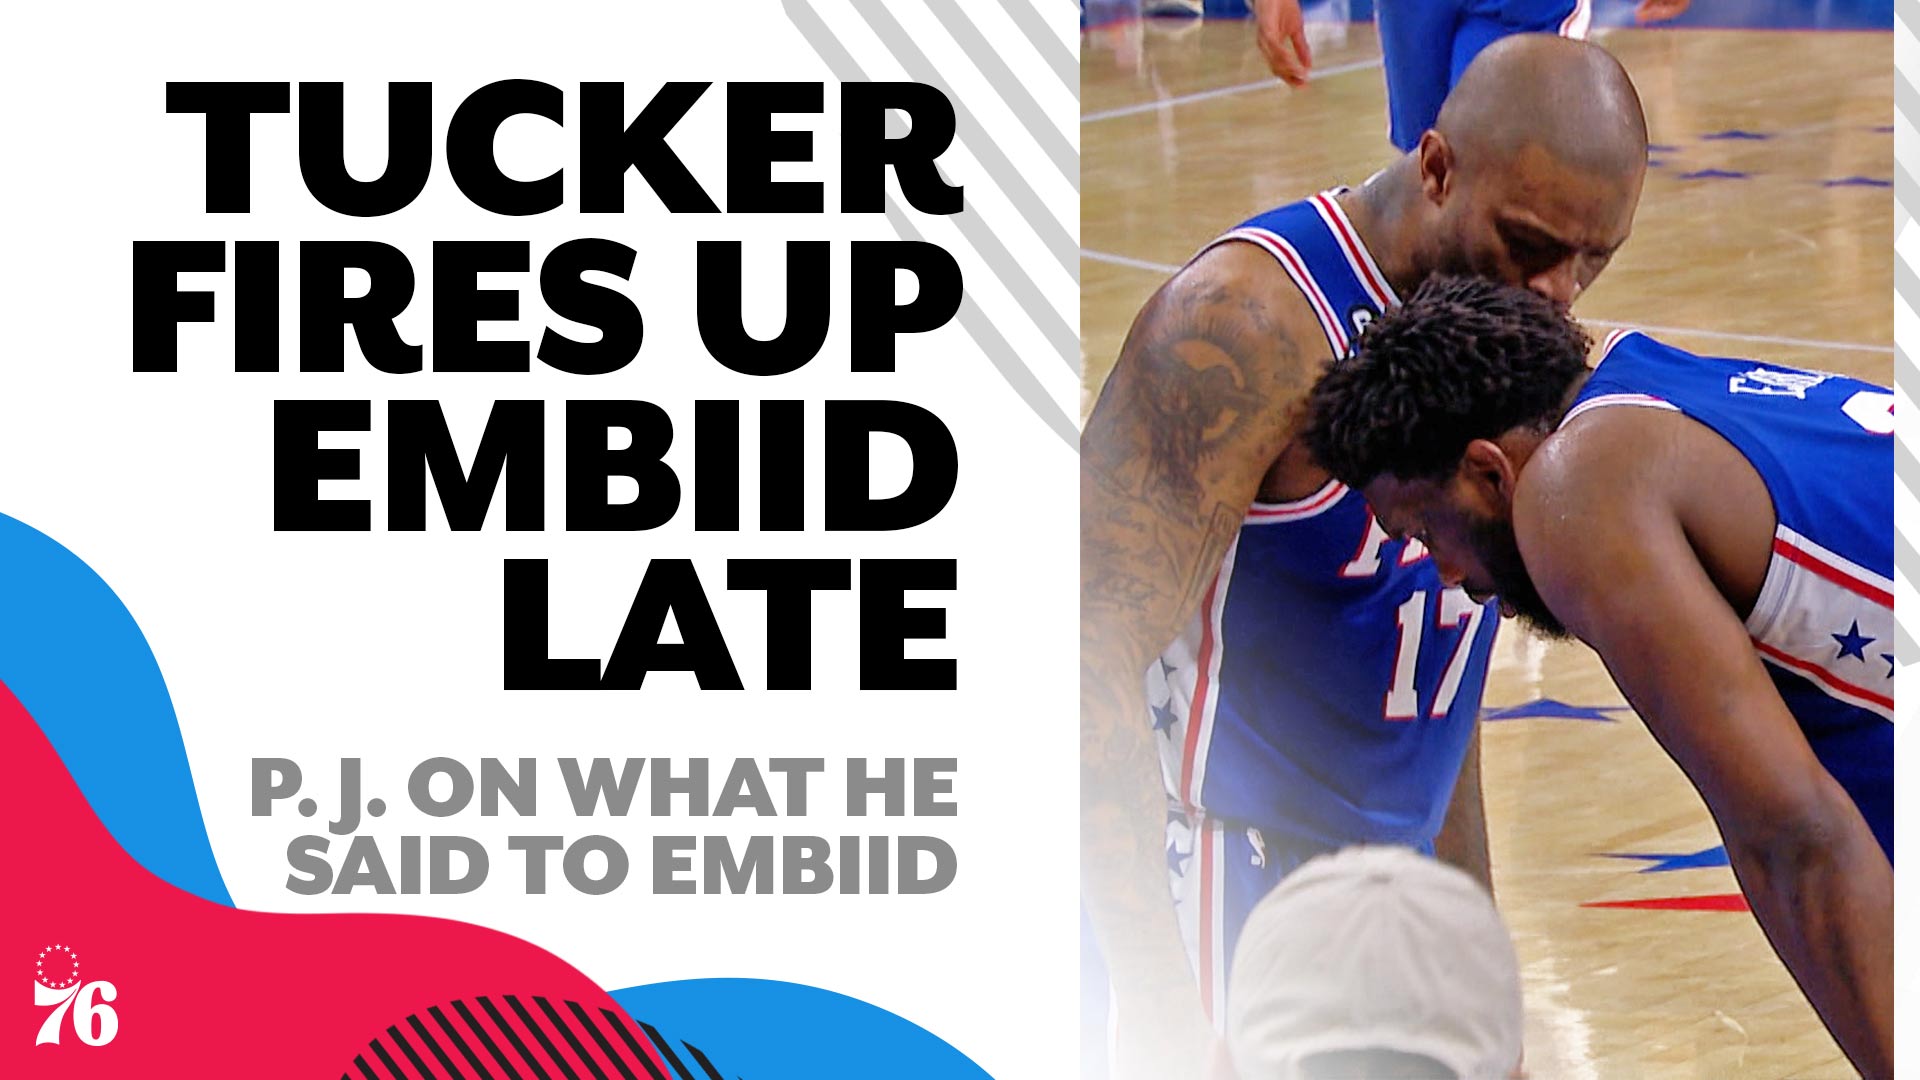 P.J. Tucker's words to Joel Embiid may have helped the Sixers win Game 4, National Sports